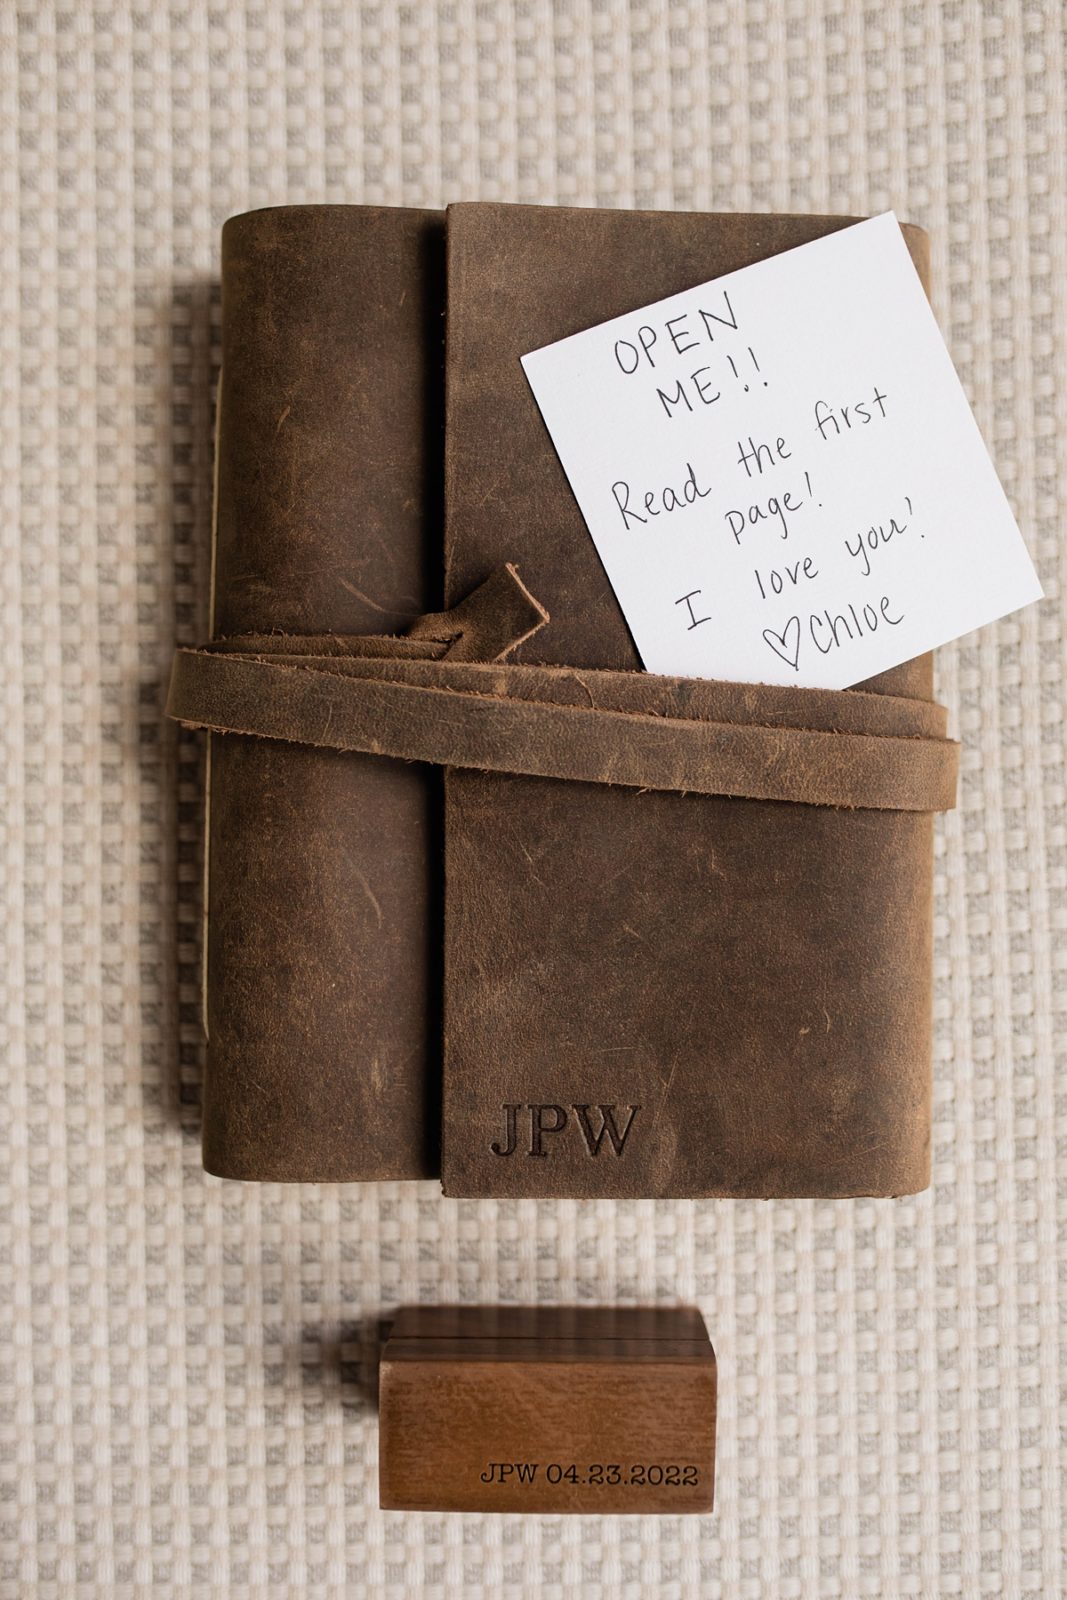 Bride's note to groom with custom engraved leather book before ceremony.